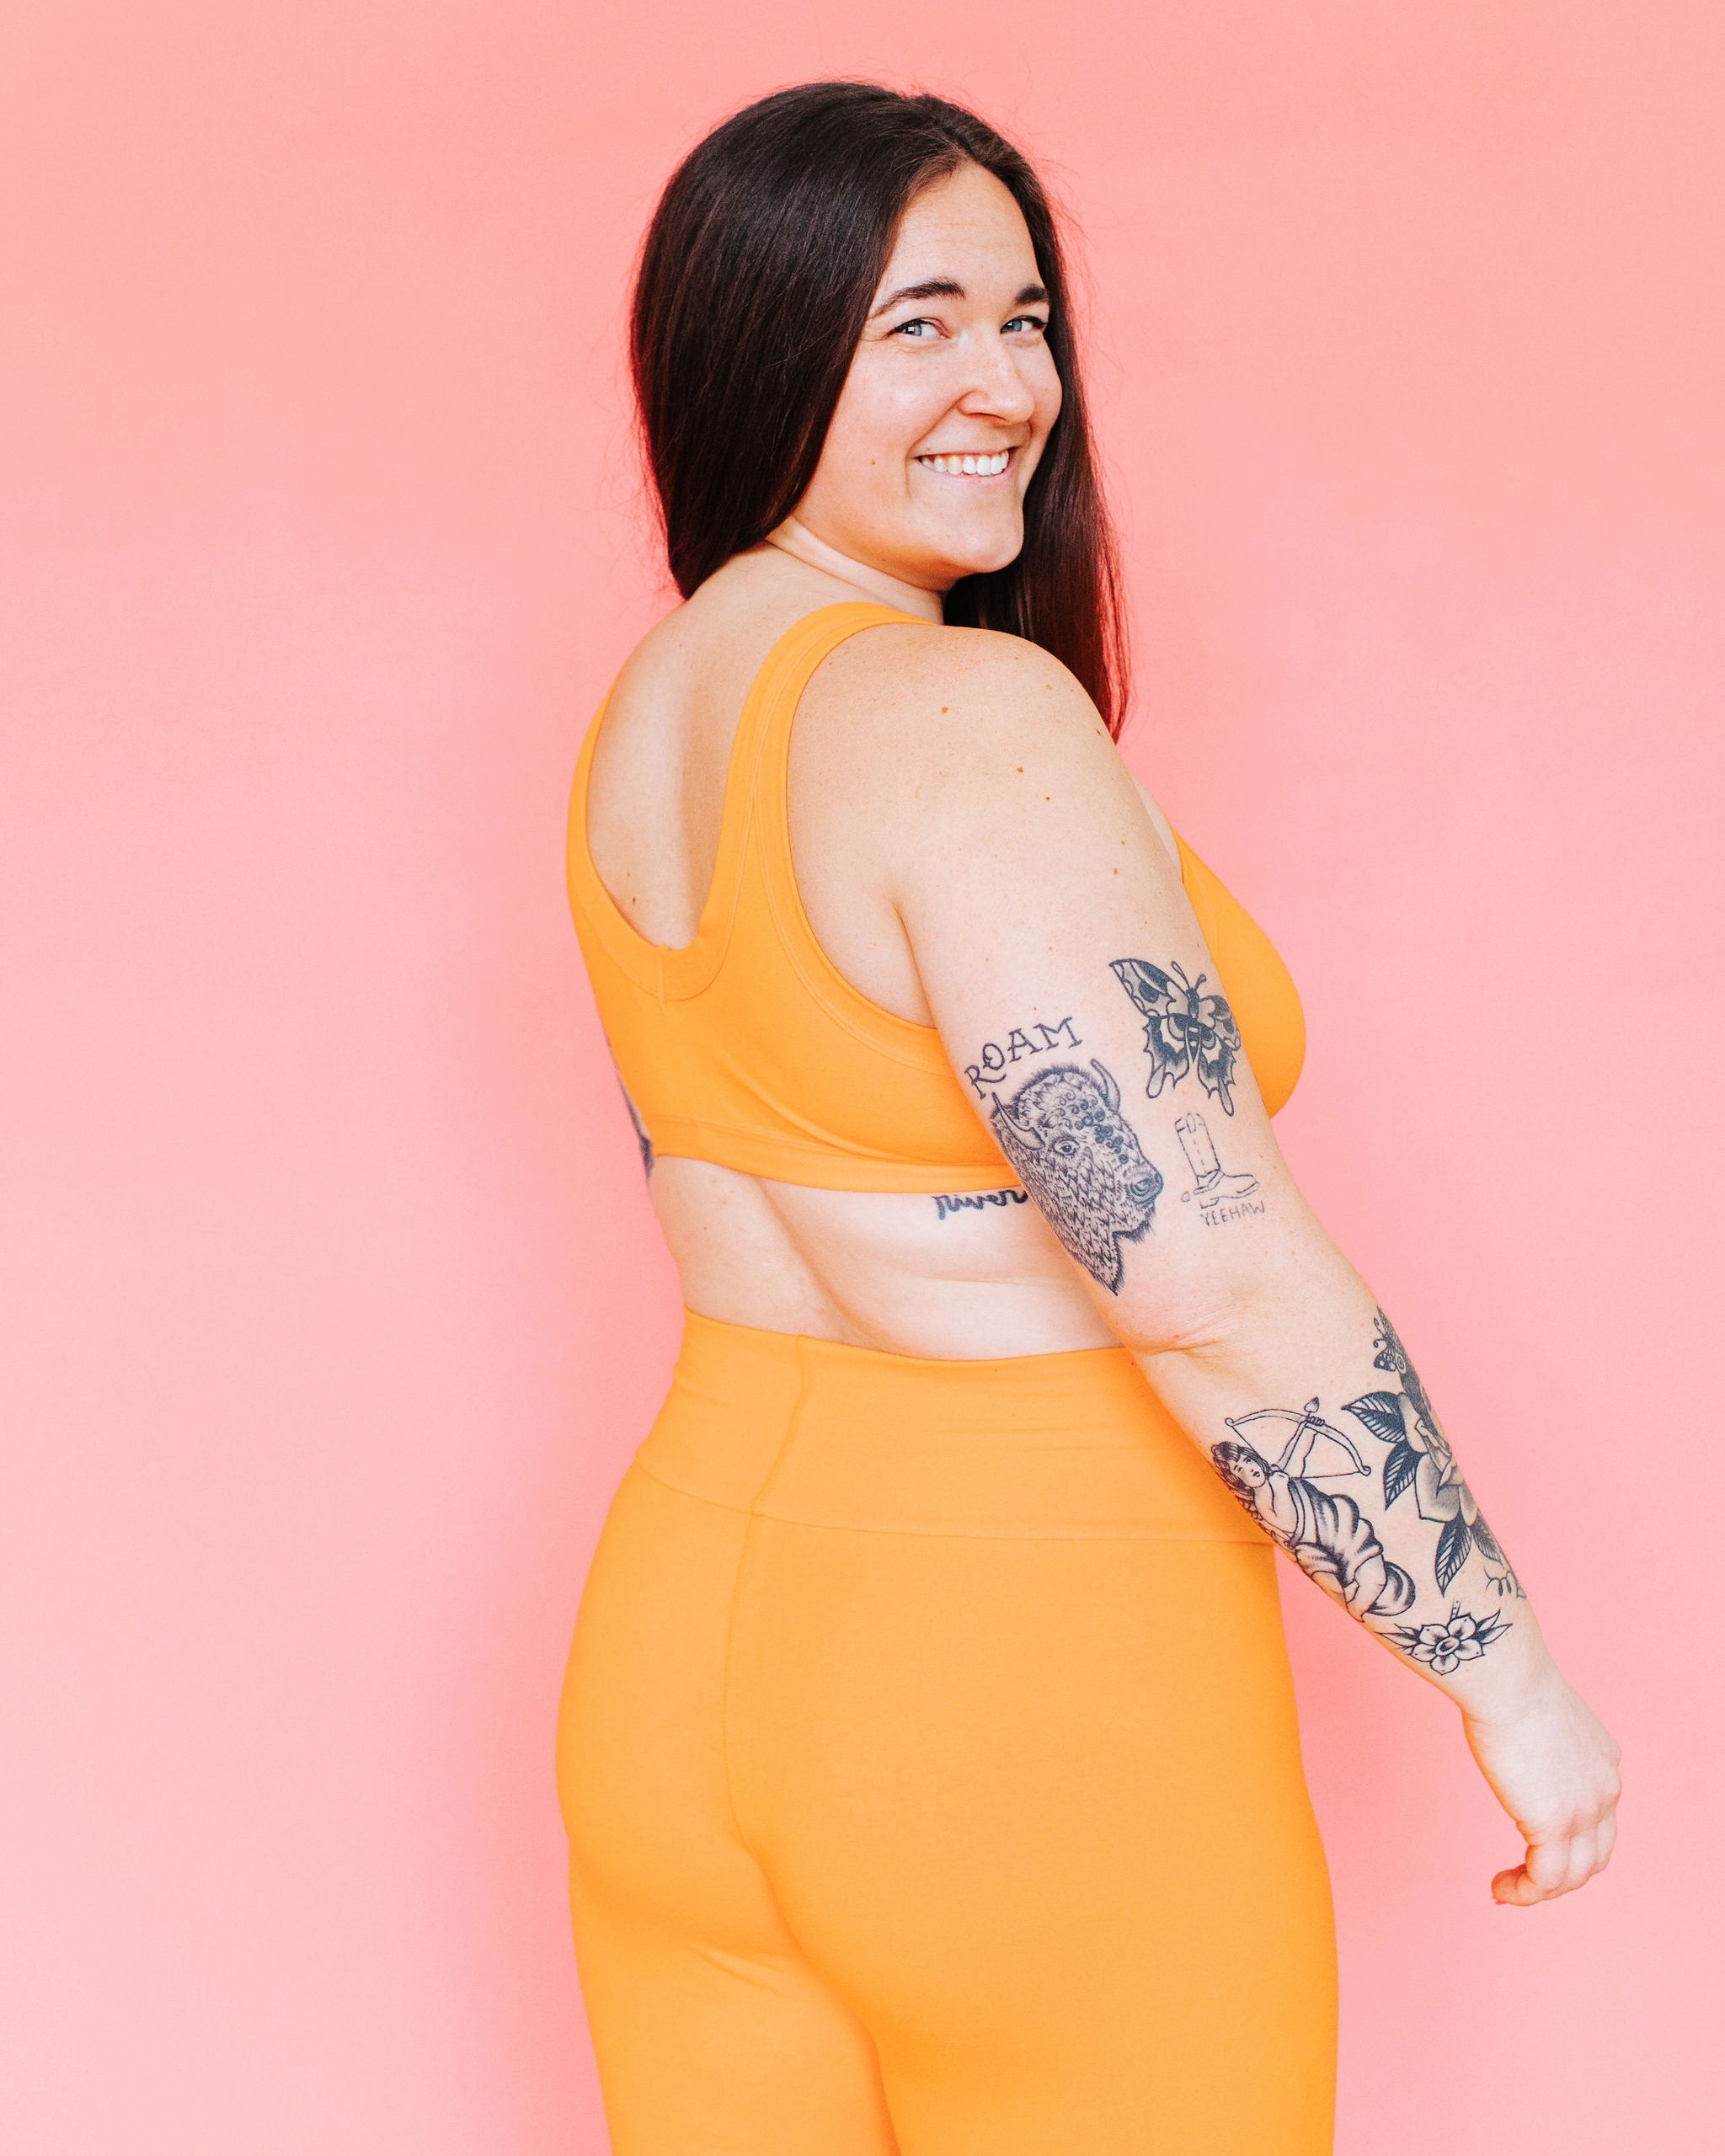 Model standing in front of a pink background with her back to us wearing Leggings and a Bralette in the orange color Oregon Sunstone.